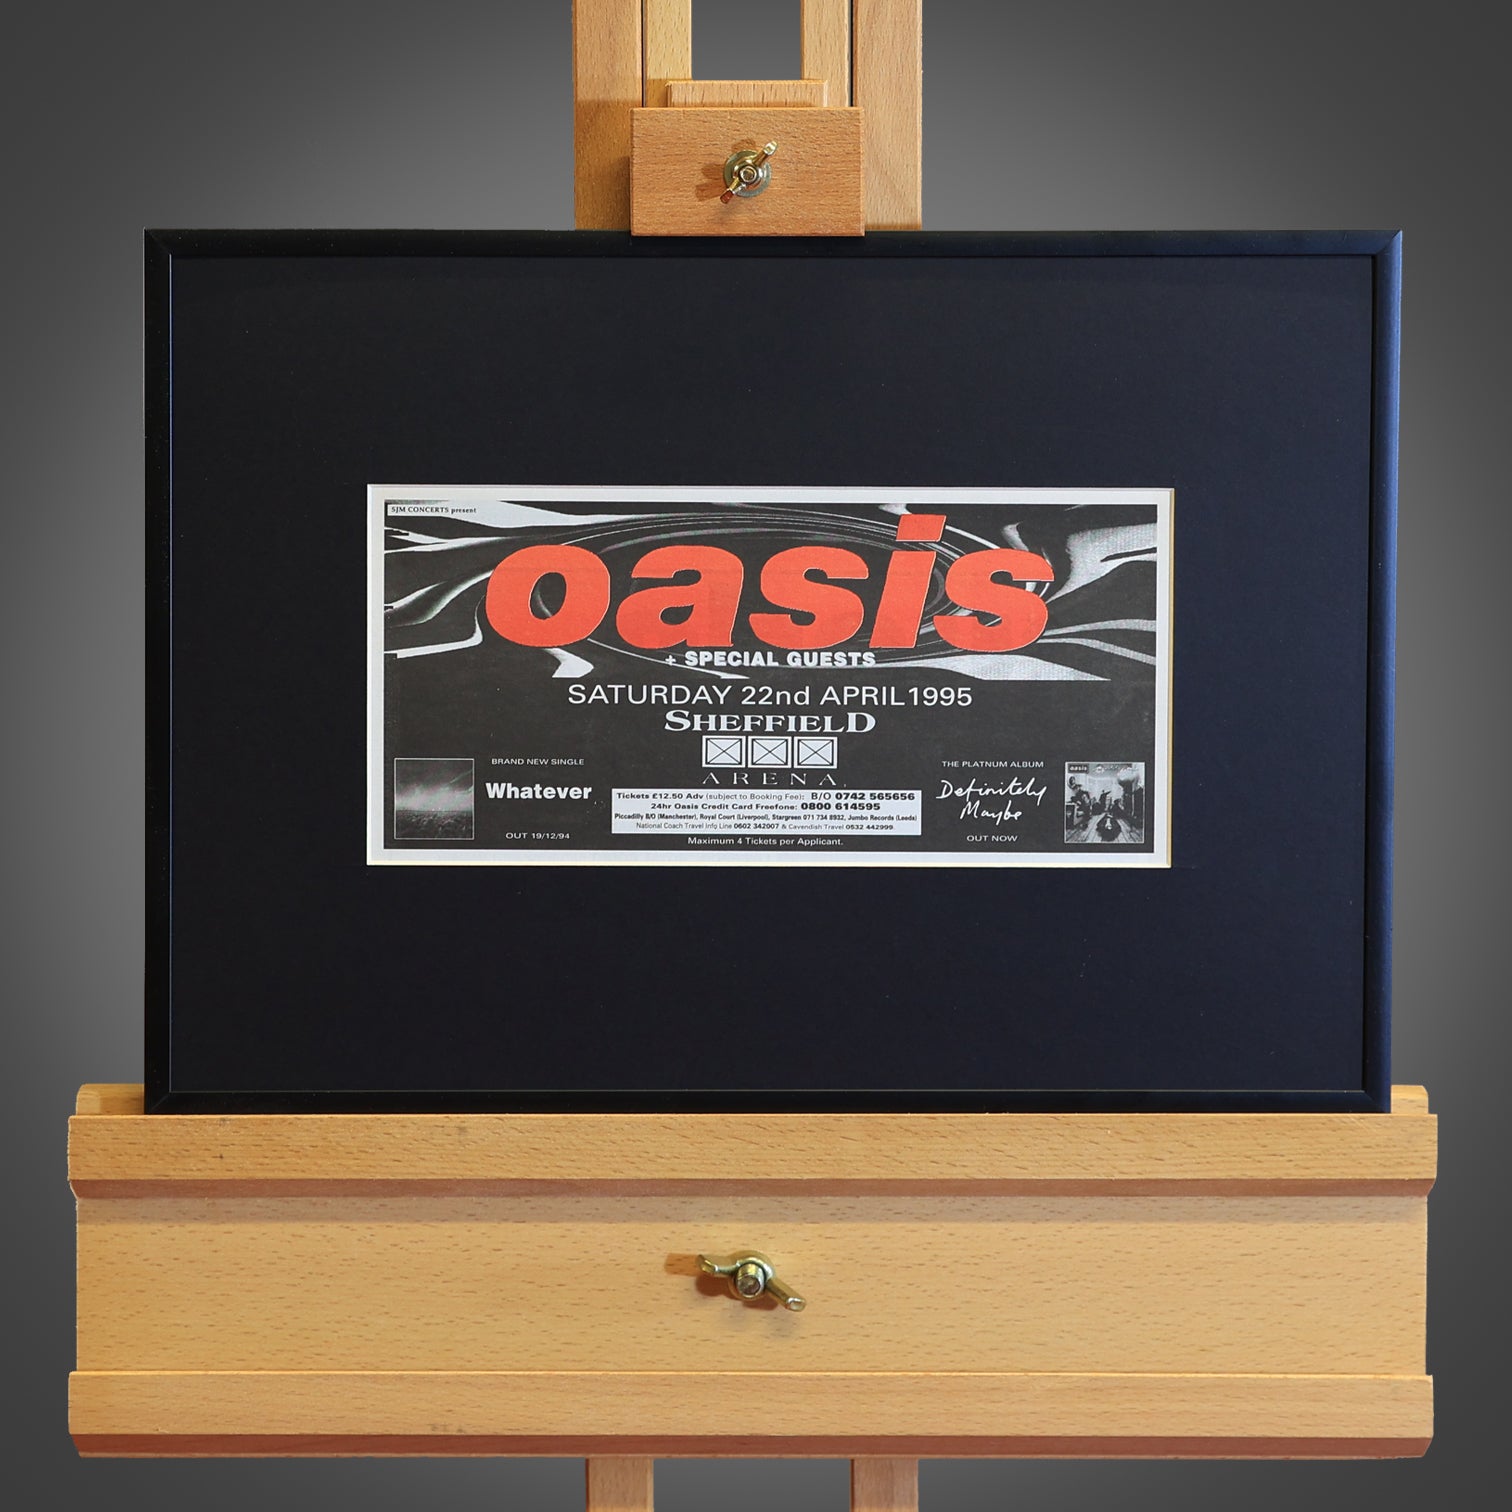 Oasis - Sheffield Arena 1995 Gig Ad - New Item